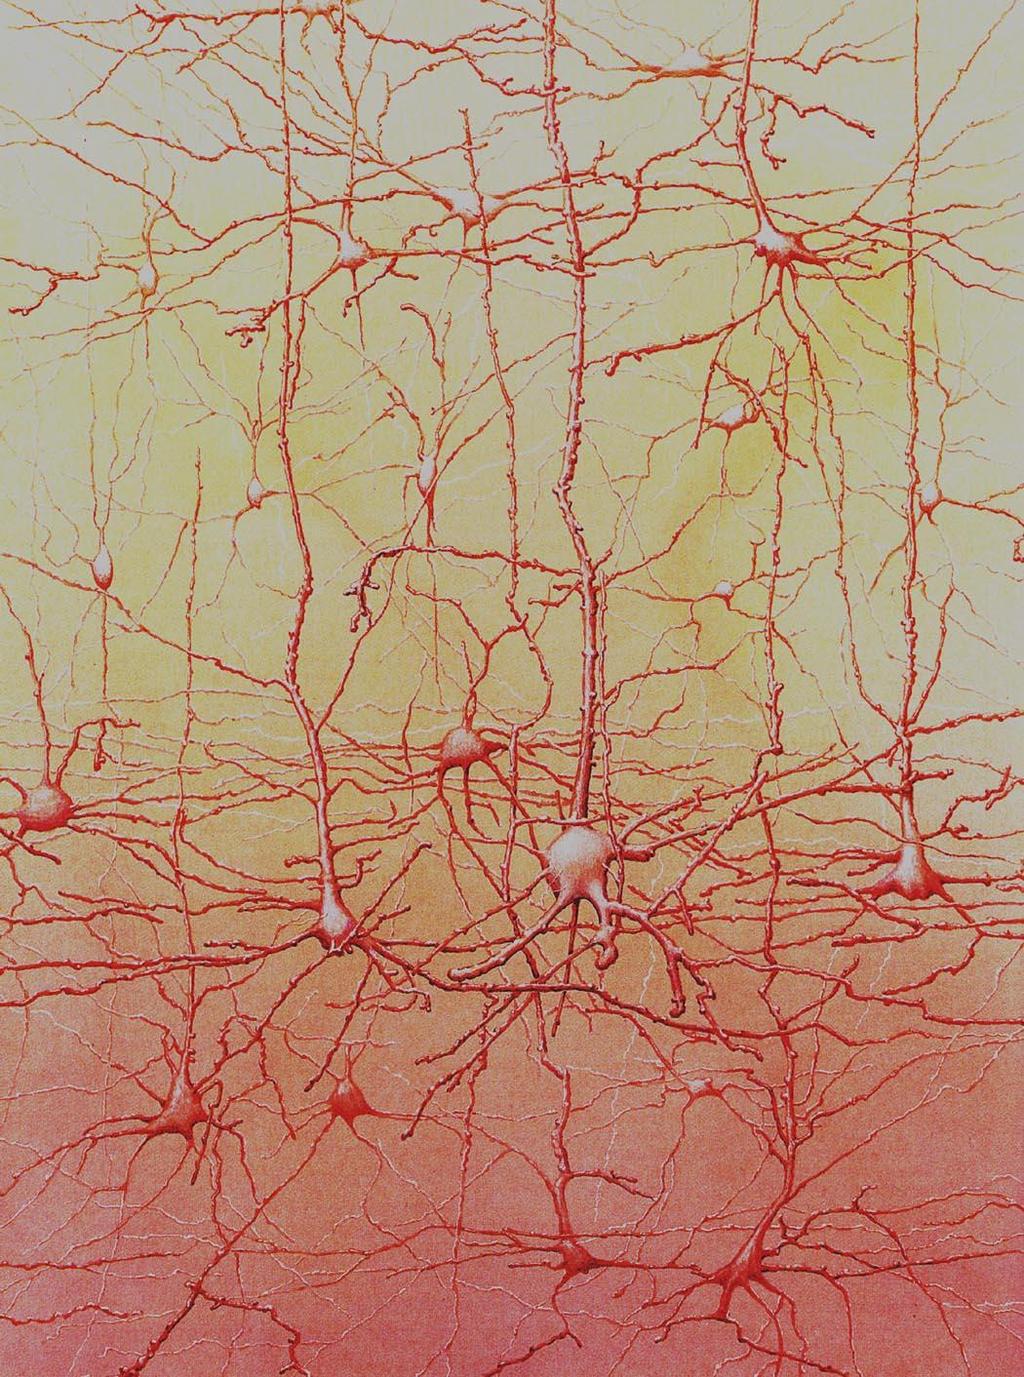 A neural neighborhood Each neuron synapses with approximately 1,000 other